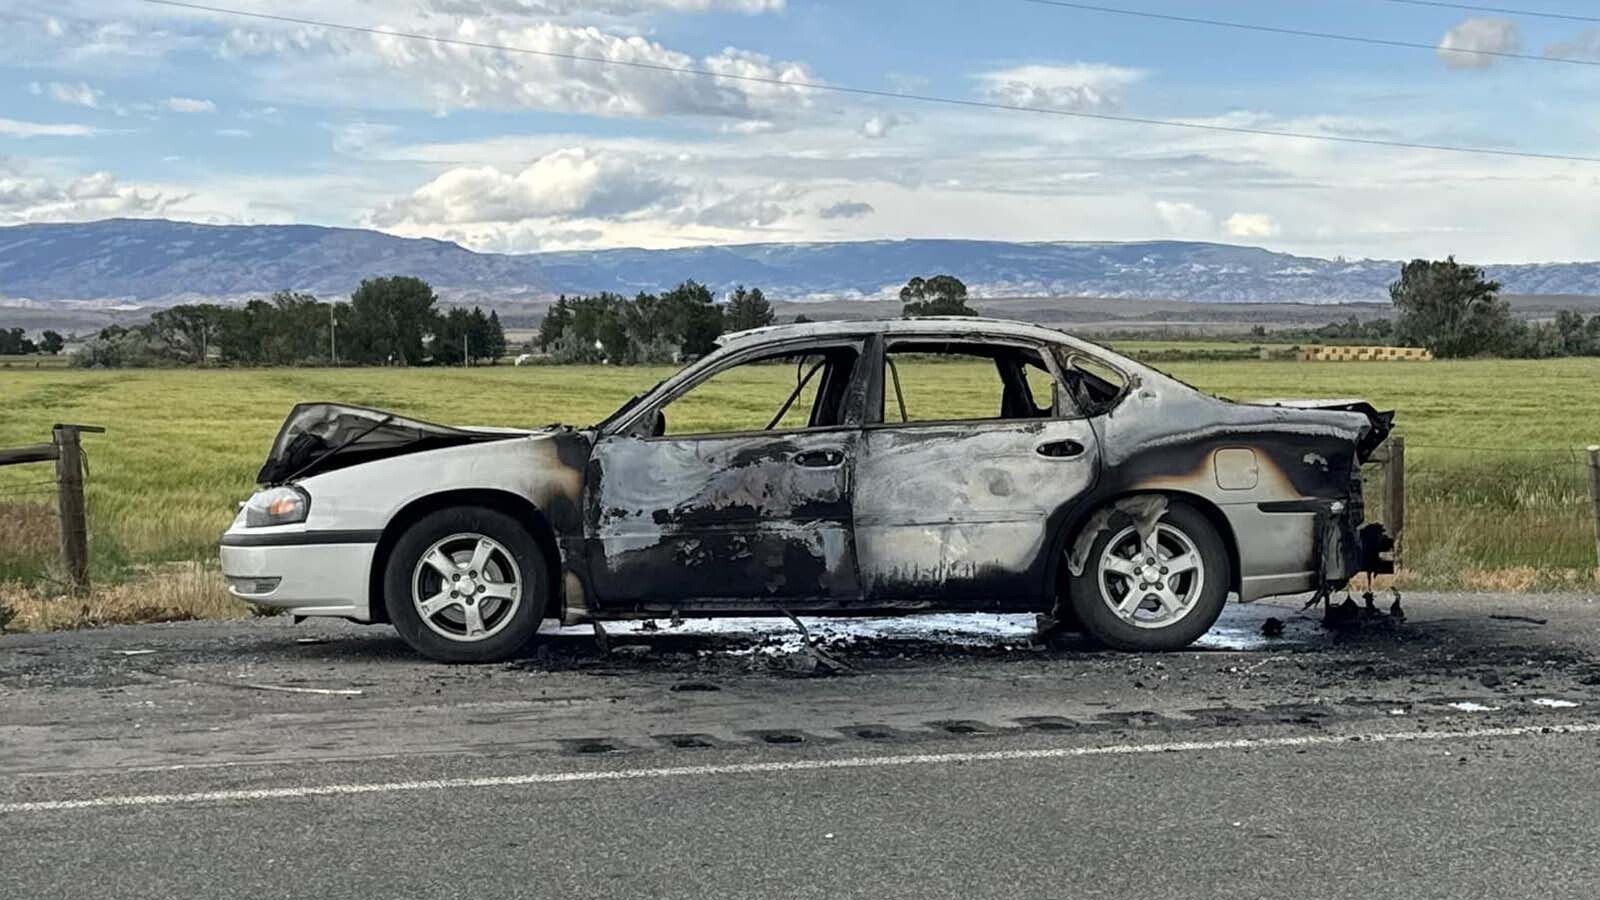 Four males were seriously burned on the Fourth of July when a cigarette sparked off some fireworks inside this car, setting it on fire.